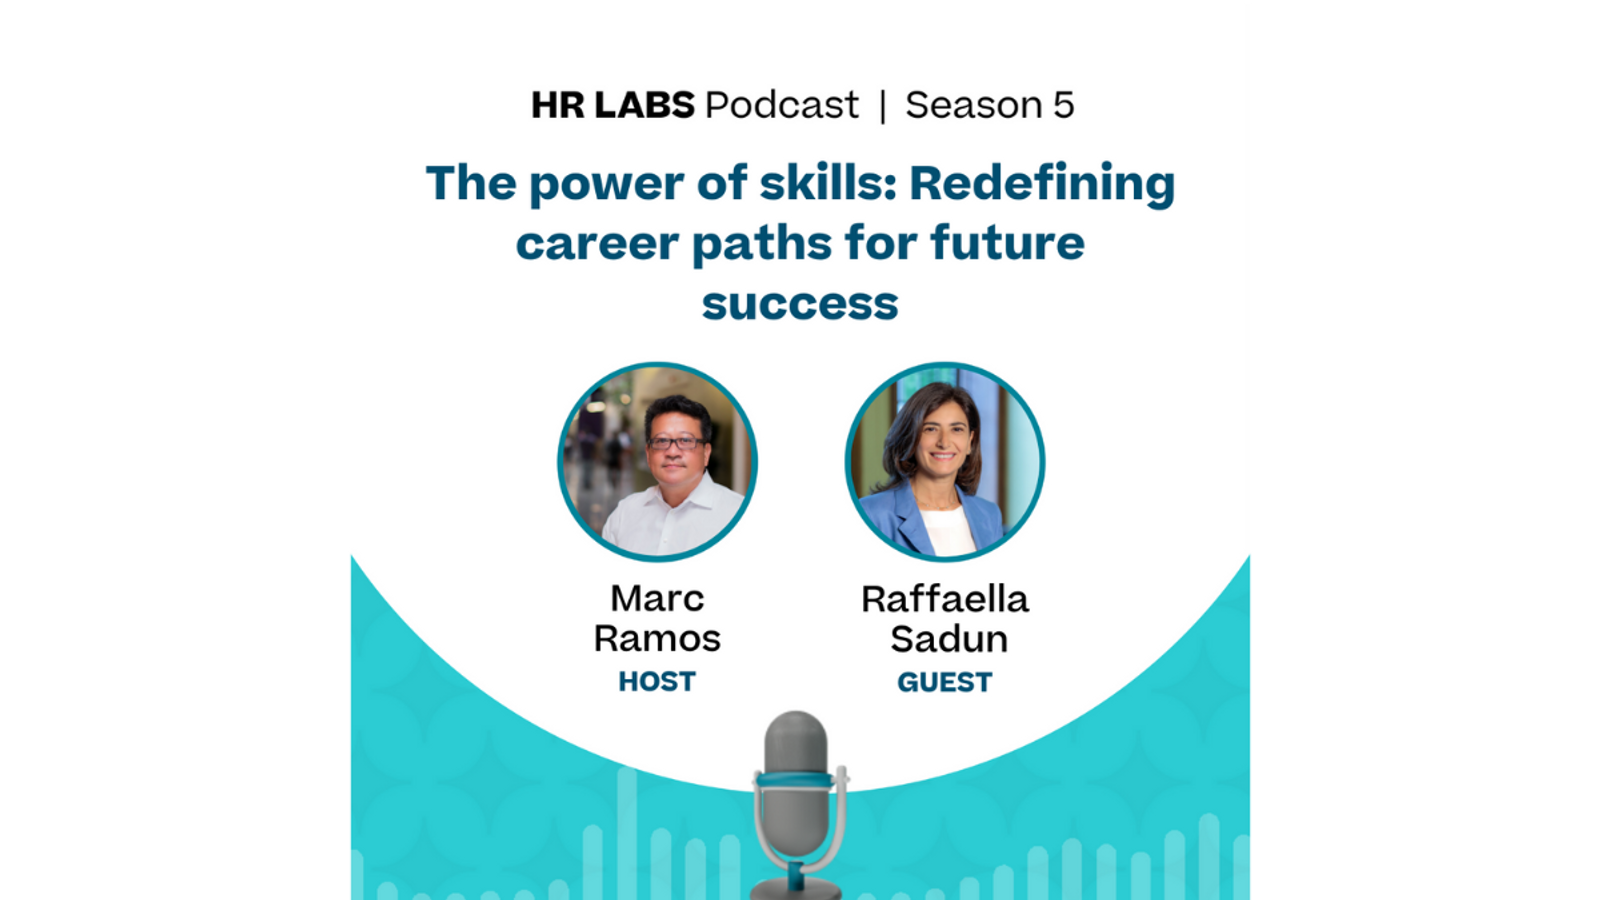 HR Labs Season 5: The power of skills: Redefining career paths for future success